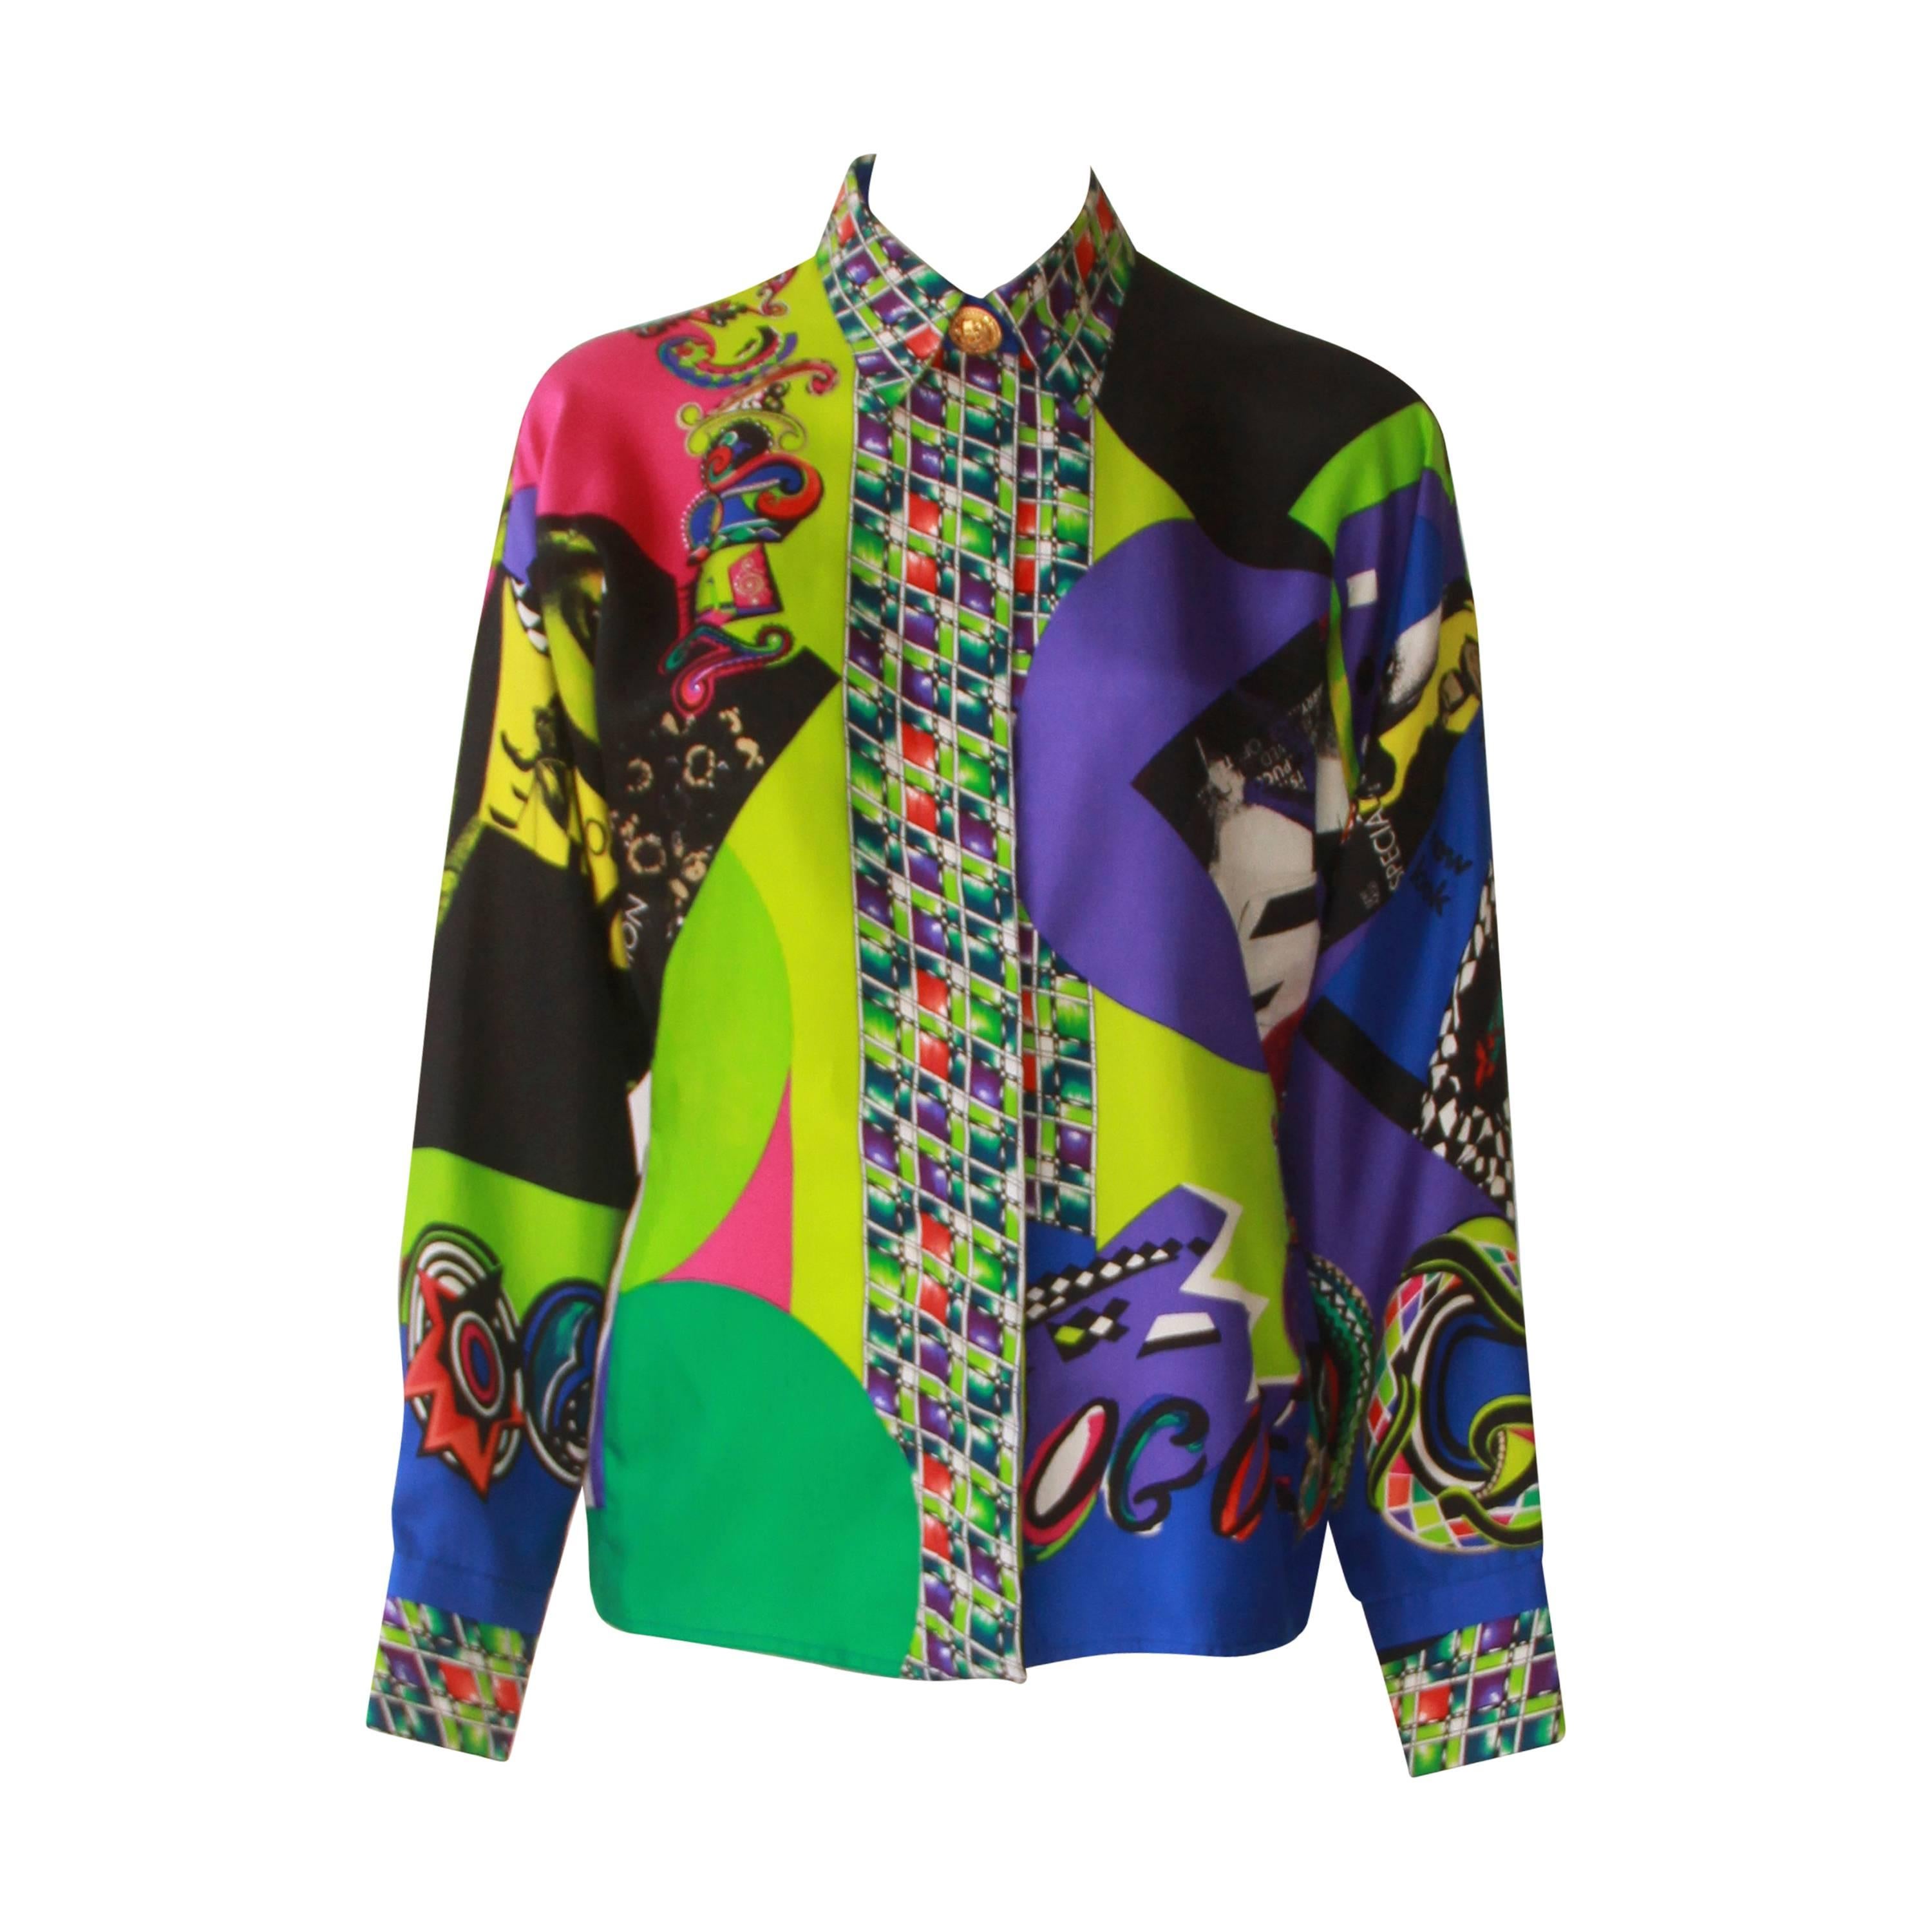 Gianni Versace Vogue Printed Silk Shirt Spring 1991 For Sale